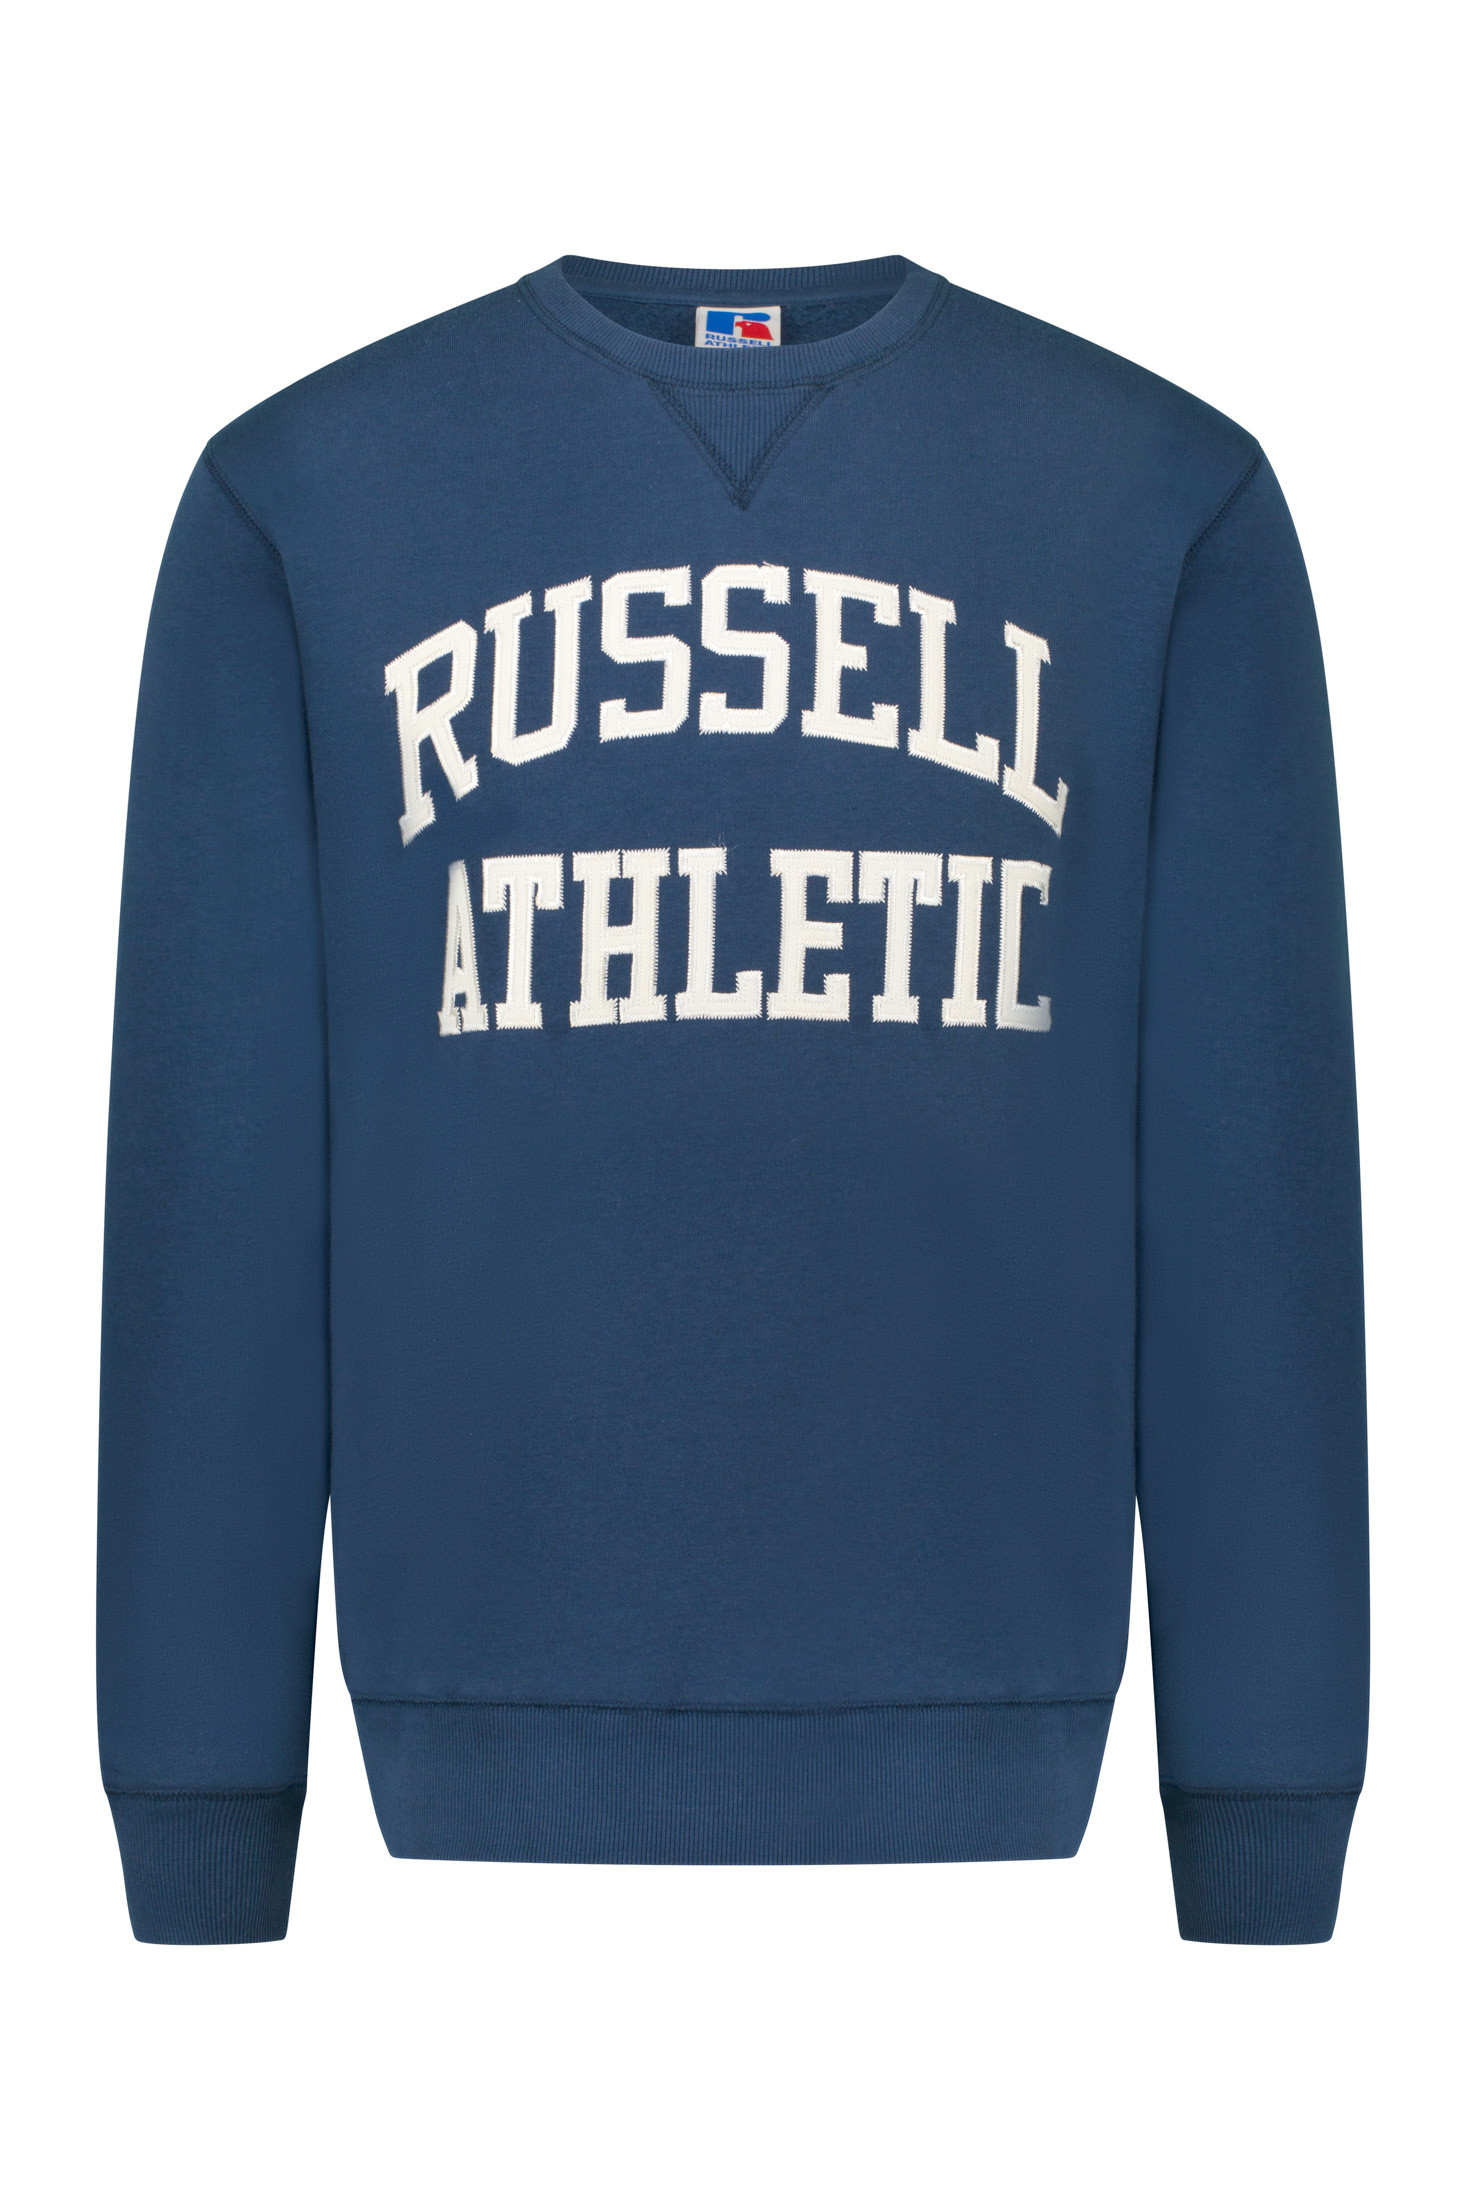 Russell Athletic - Sweatshirt with embroidery, Blue, large image number 0